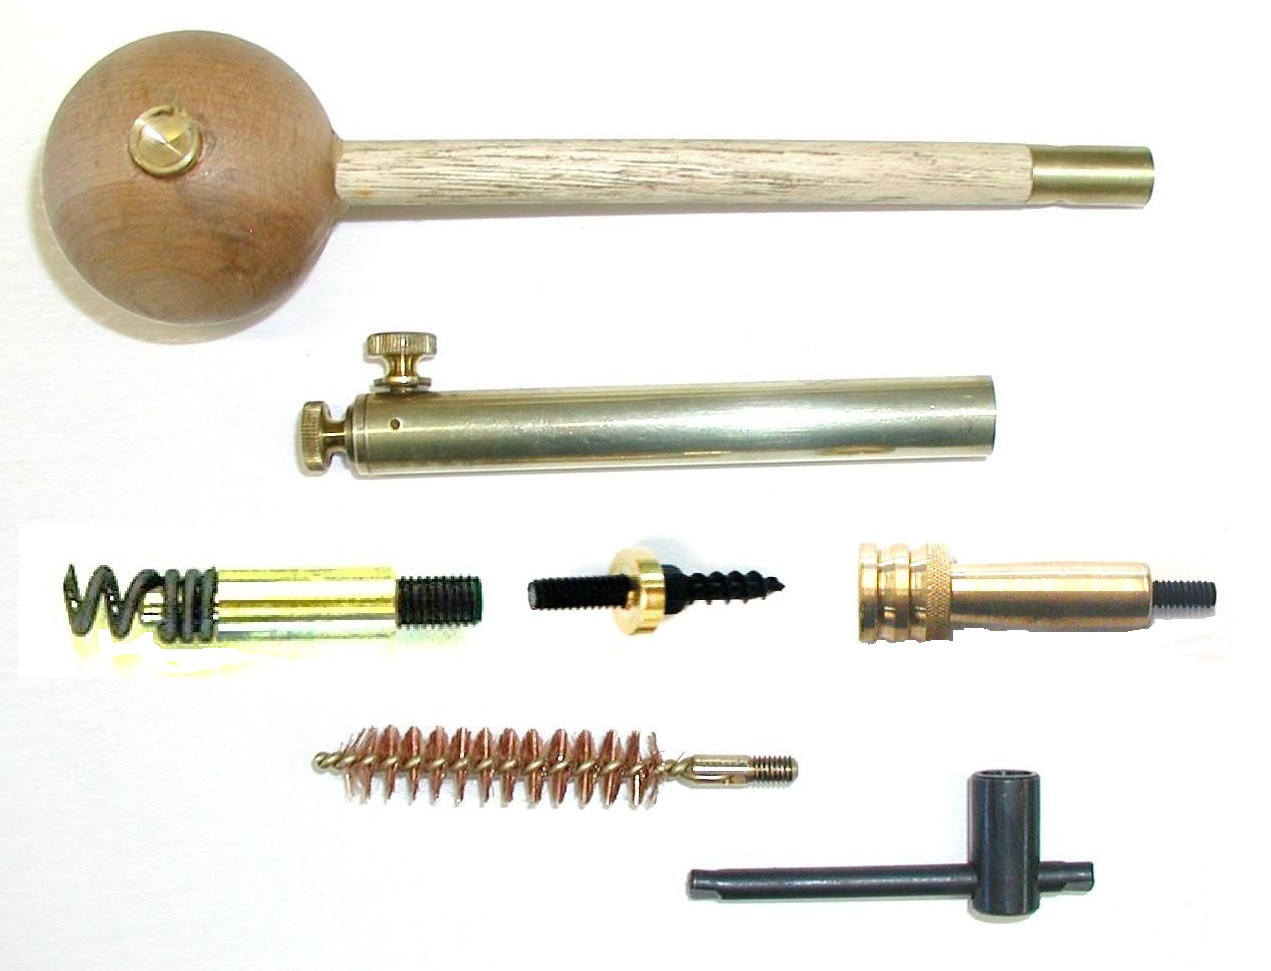 Black Powder Supplies & Black Powder Accoutrements for Muzzleloaders